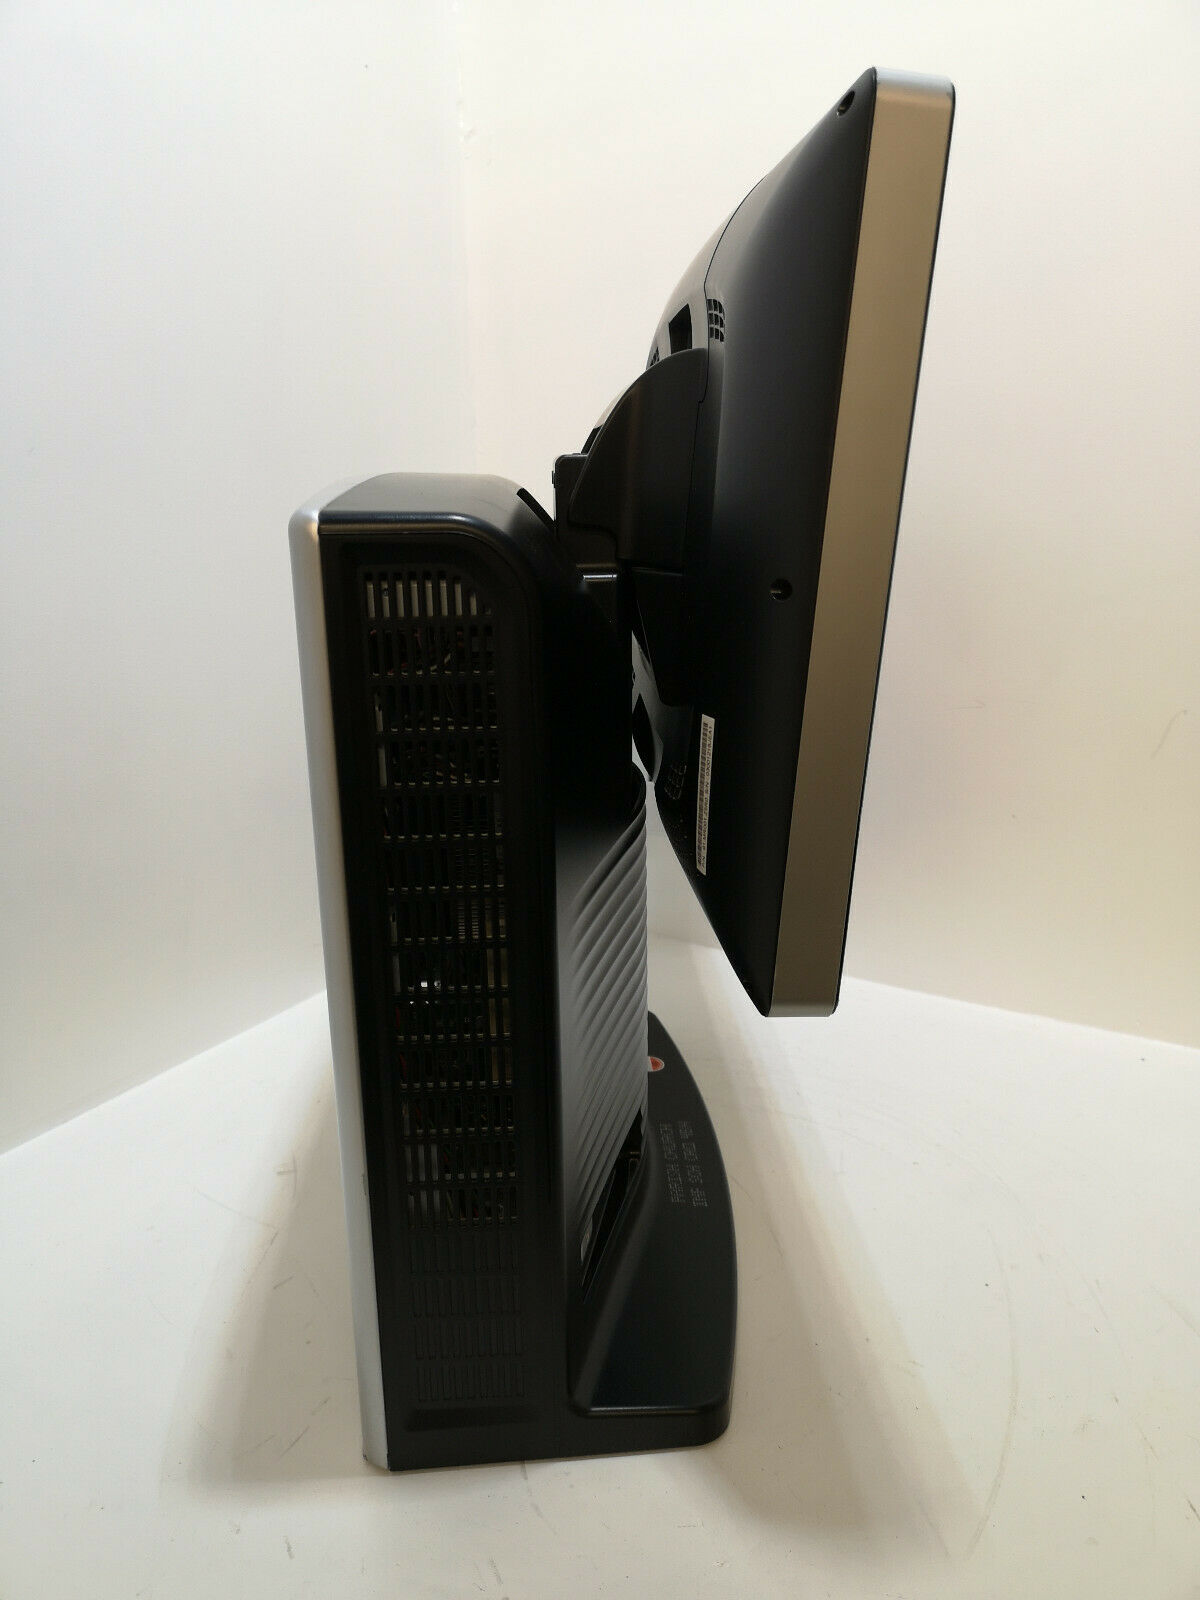 Refurbished RM One 300 Desktop All In One PC